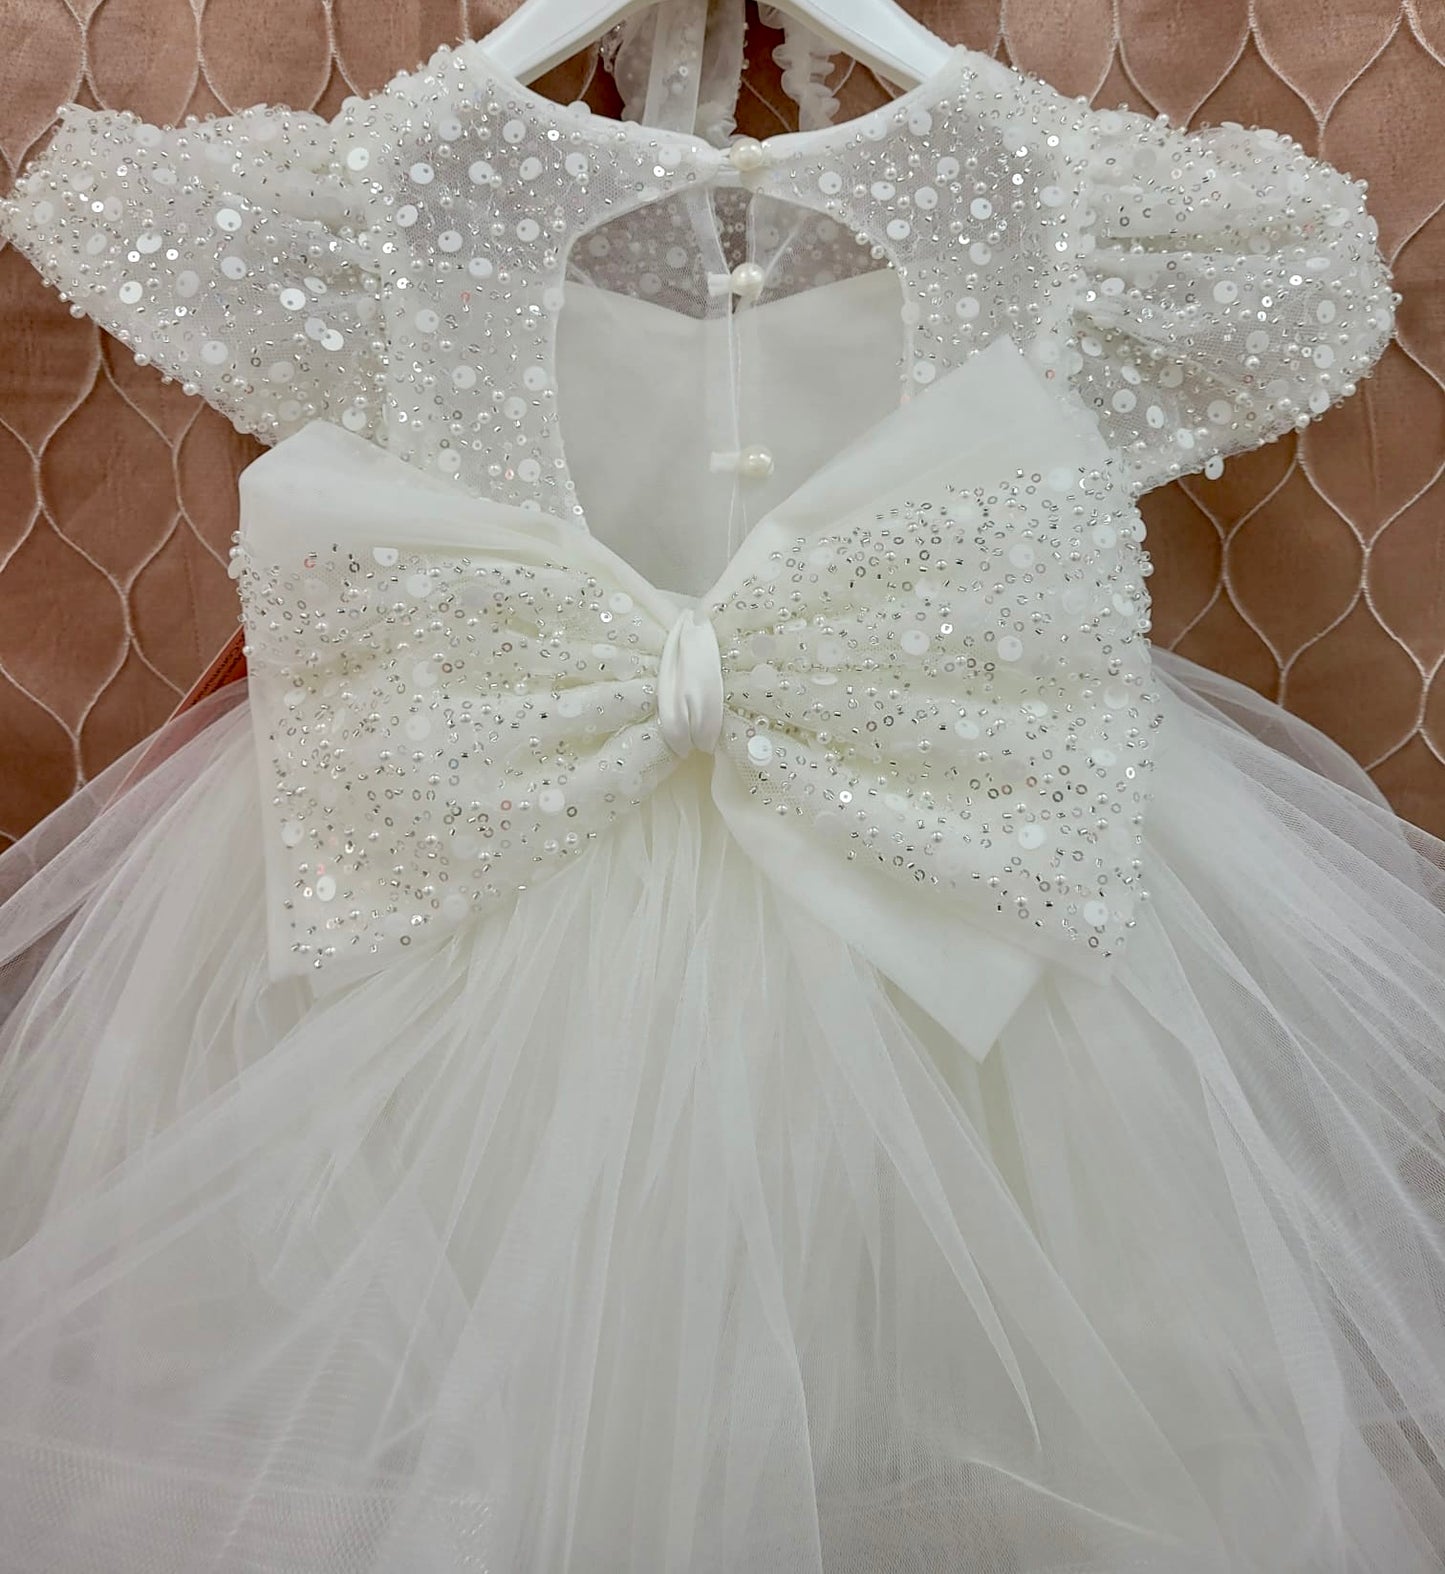 White Baby Christening Gown for your Infant Baptism Day | La Bavetta | Brooklyn Shopping